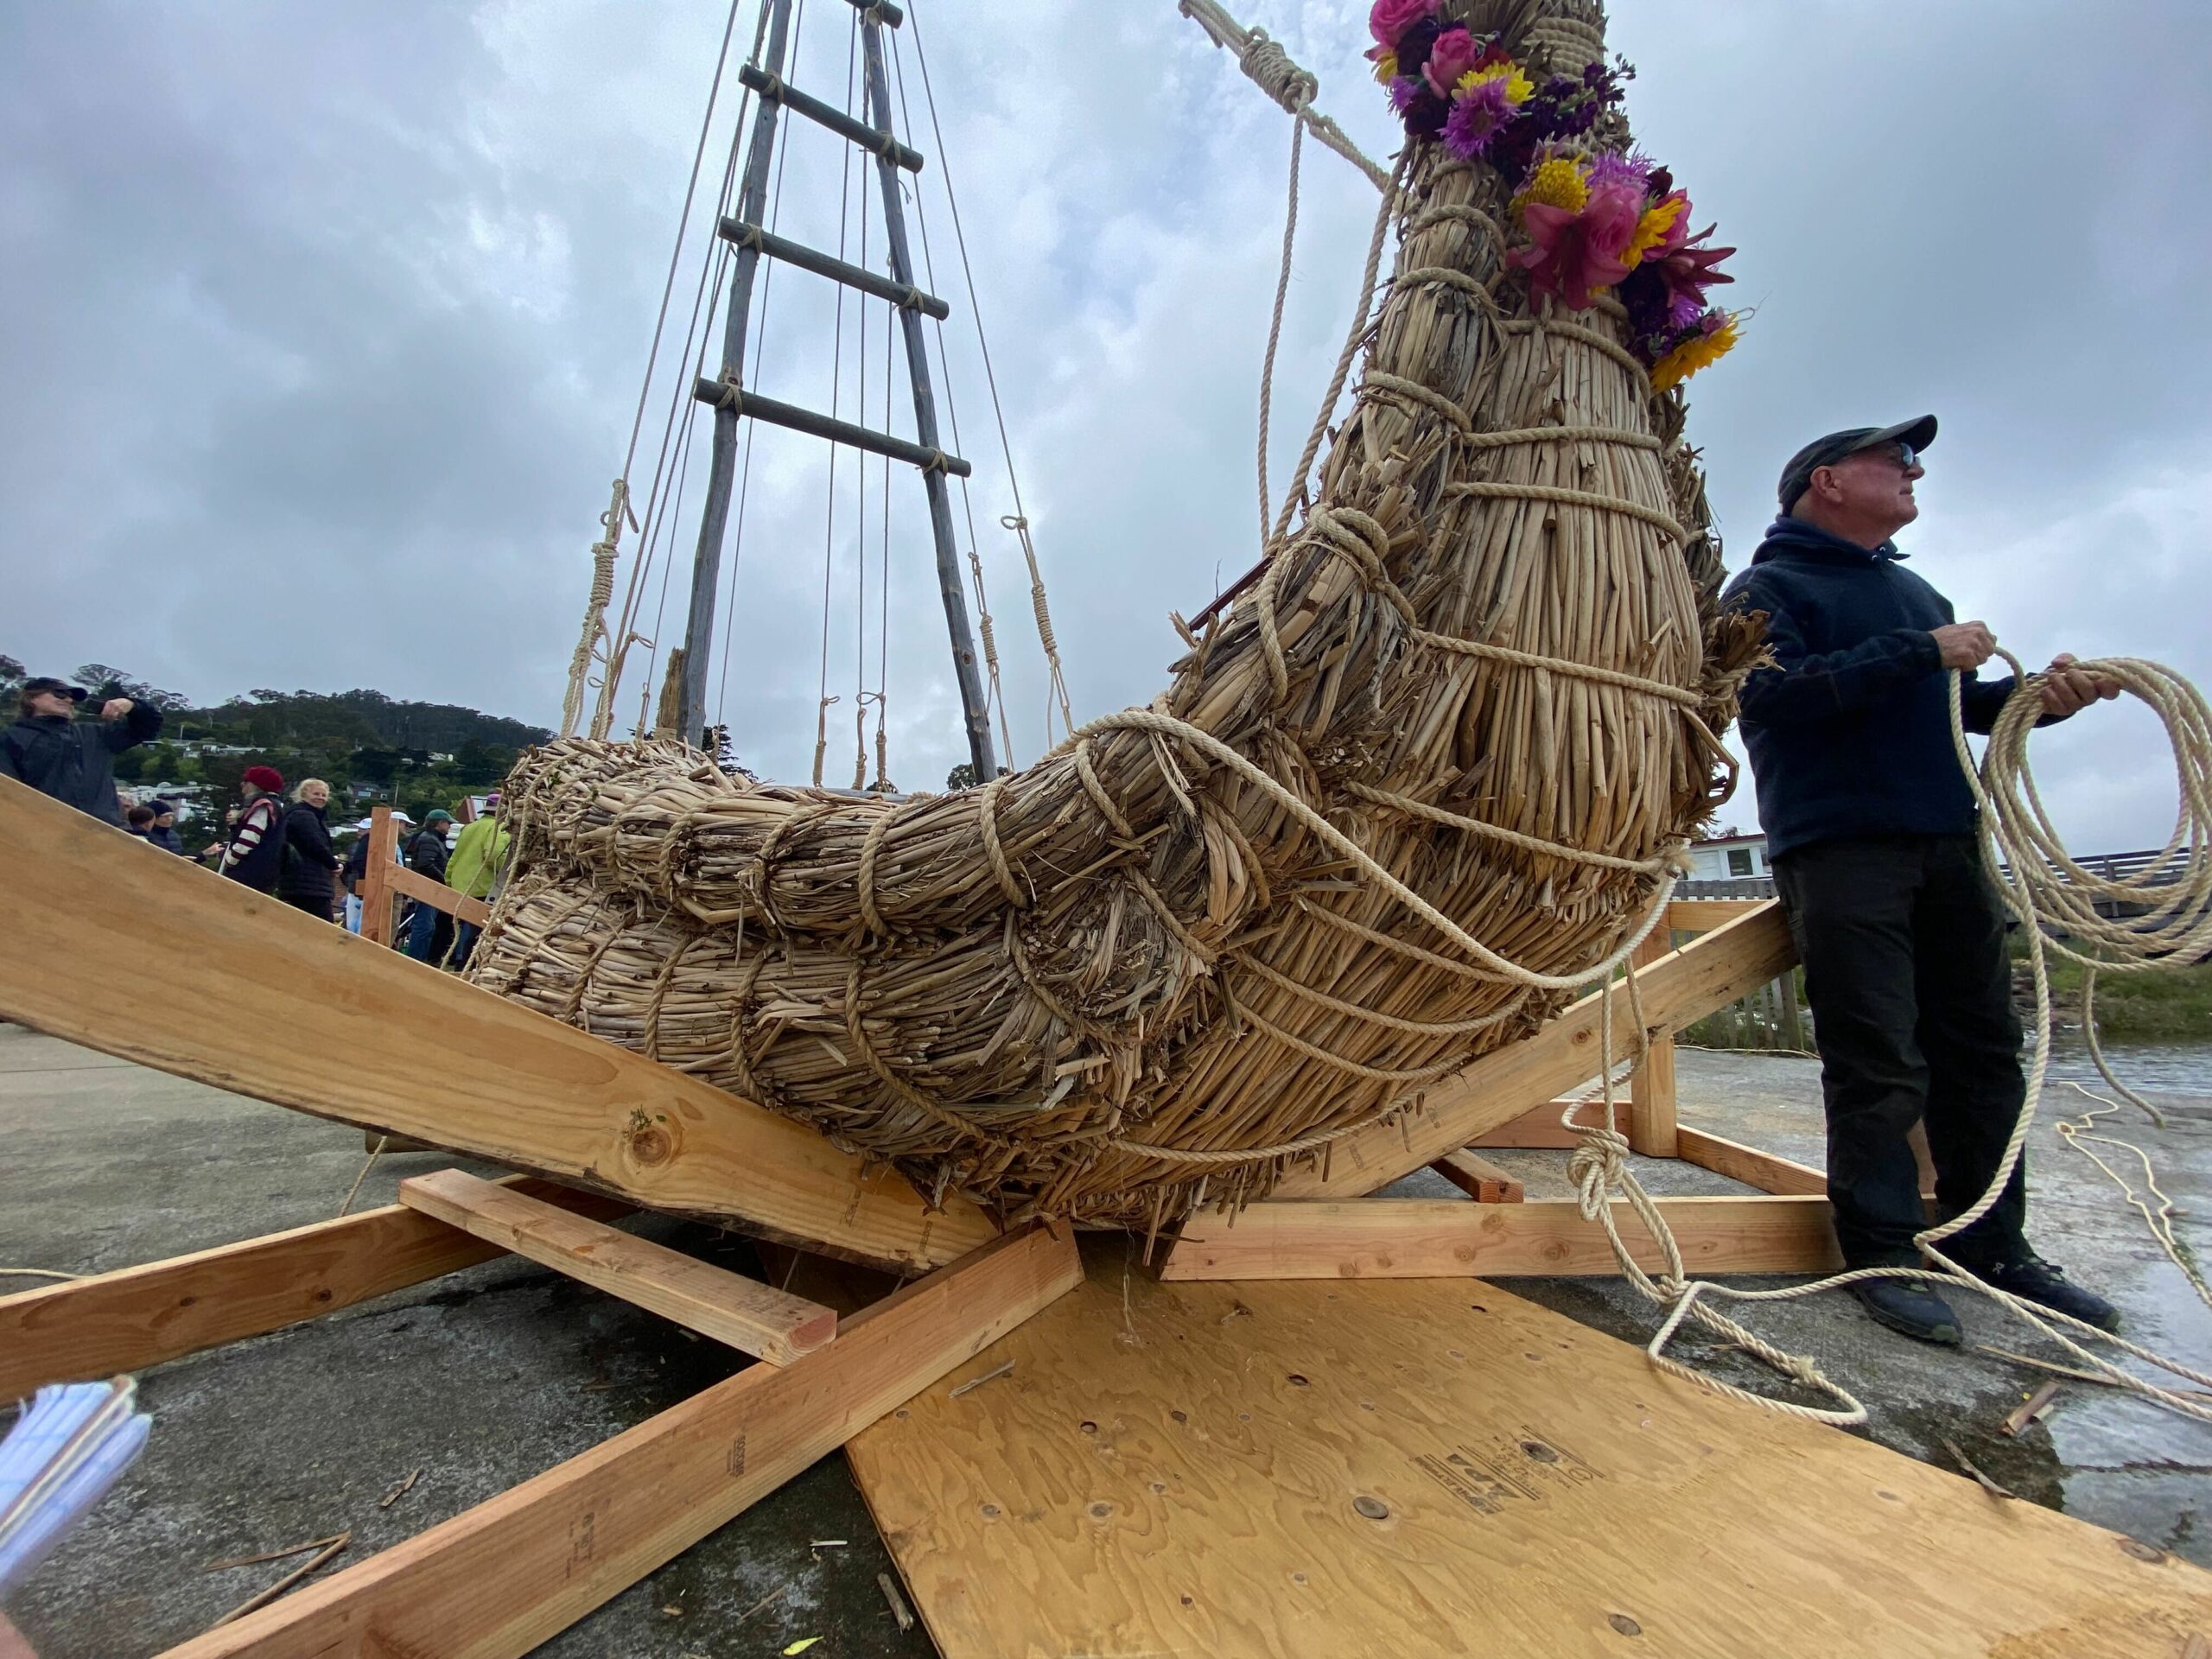 See Photos of the Hand-Built Boat That Might Sail from Sausalito to Hawaii